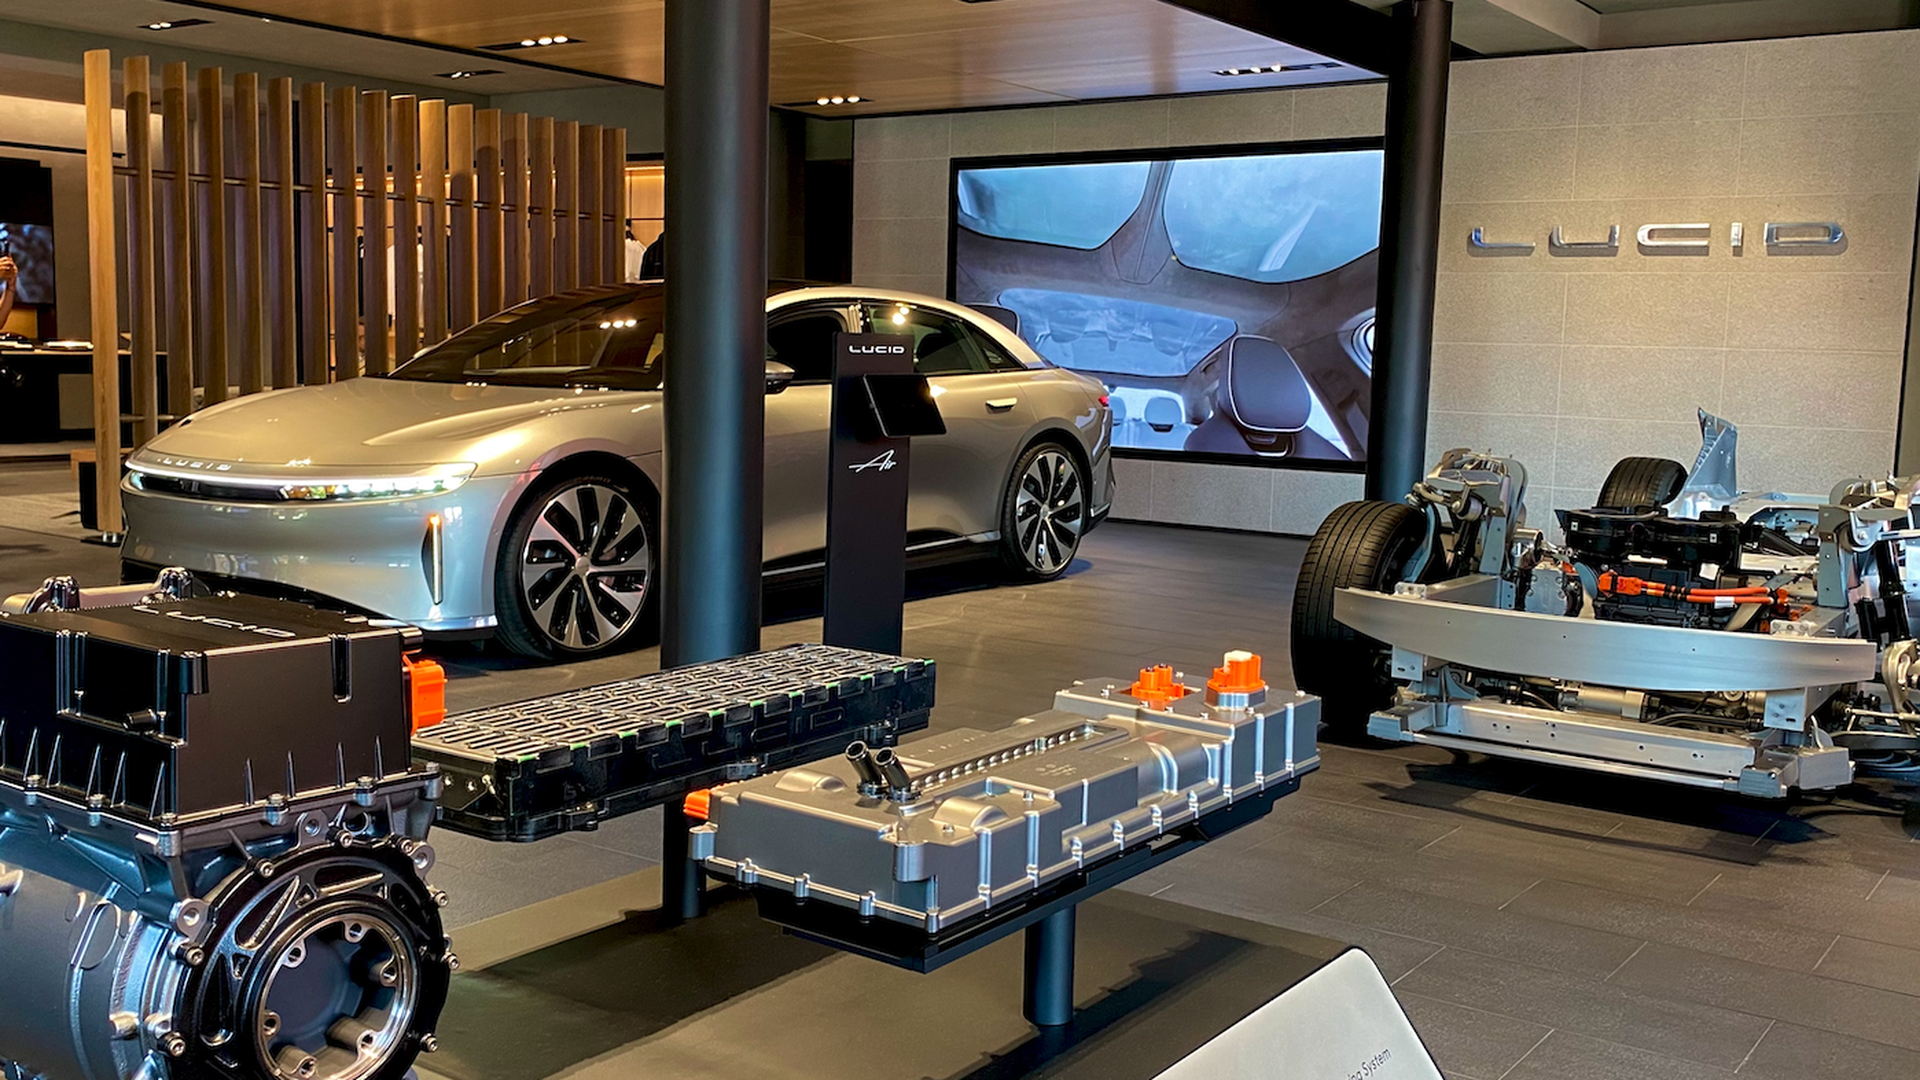 Image of a showroom with a Lucid vehicle in the background and parts of the car displayed on the showroom floor in the foreground